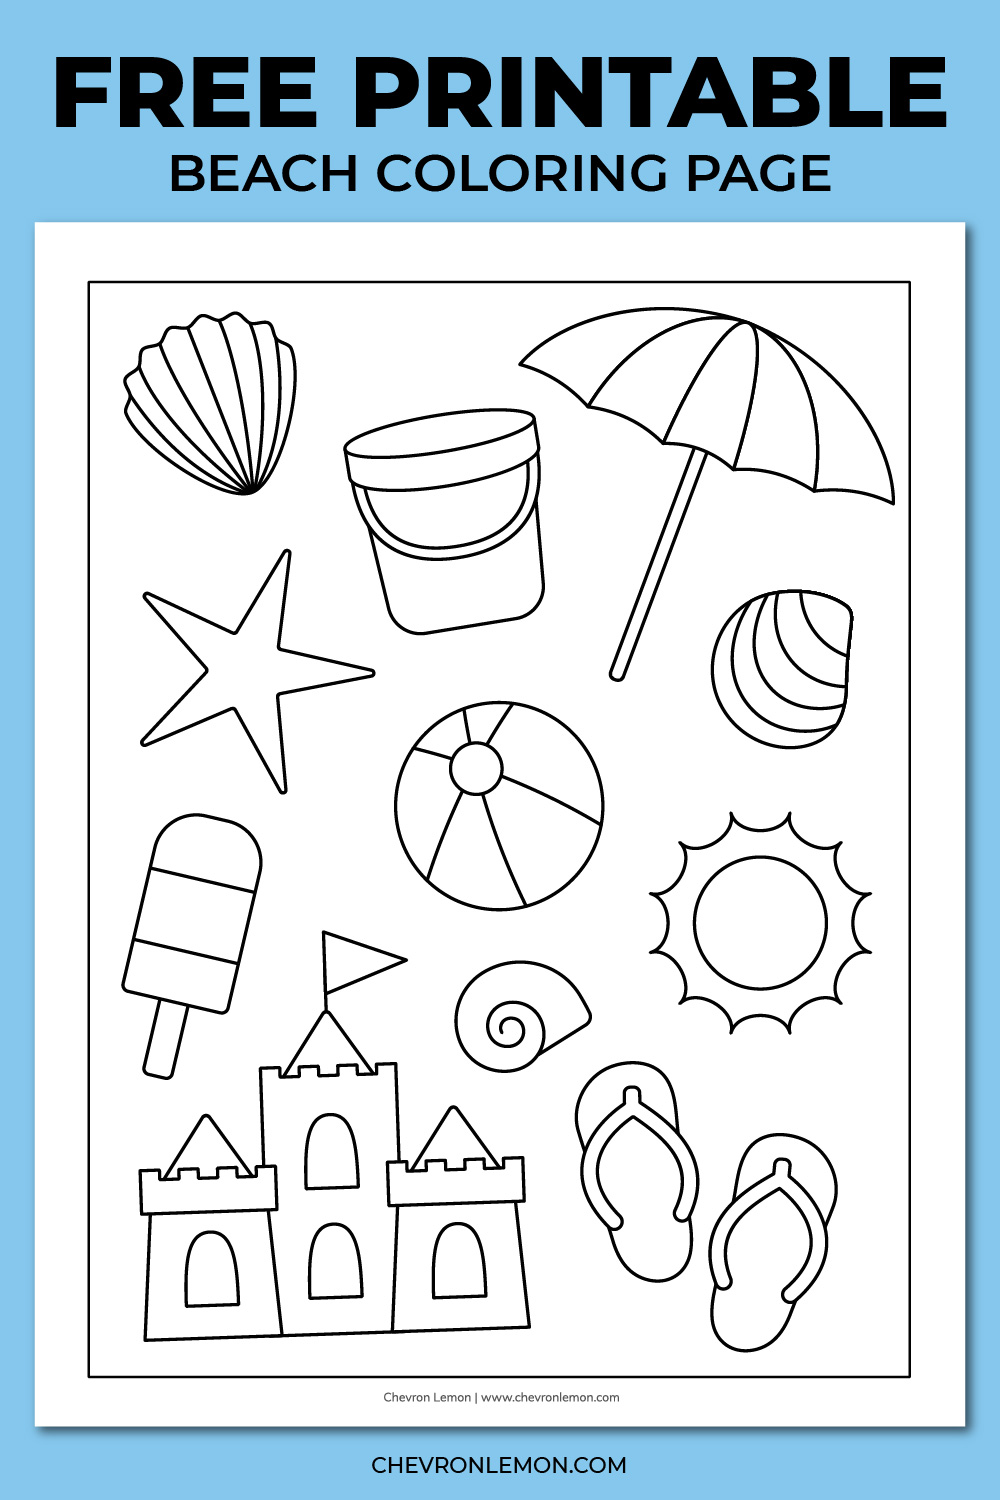 Printable beach coloring page